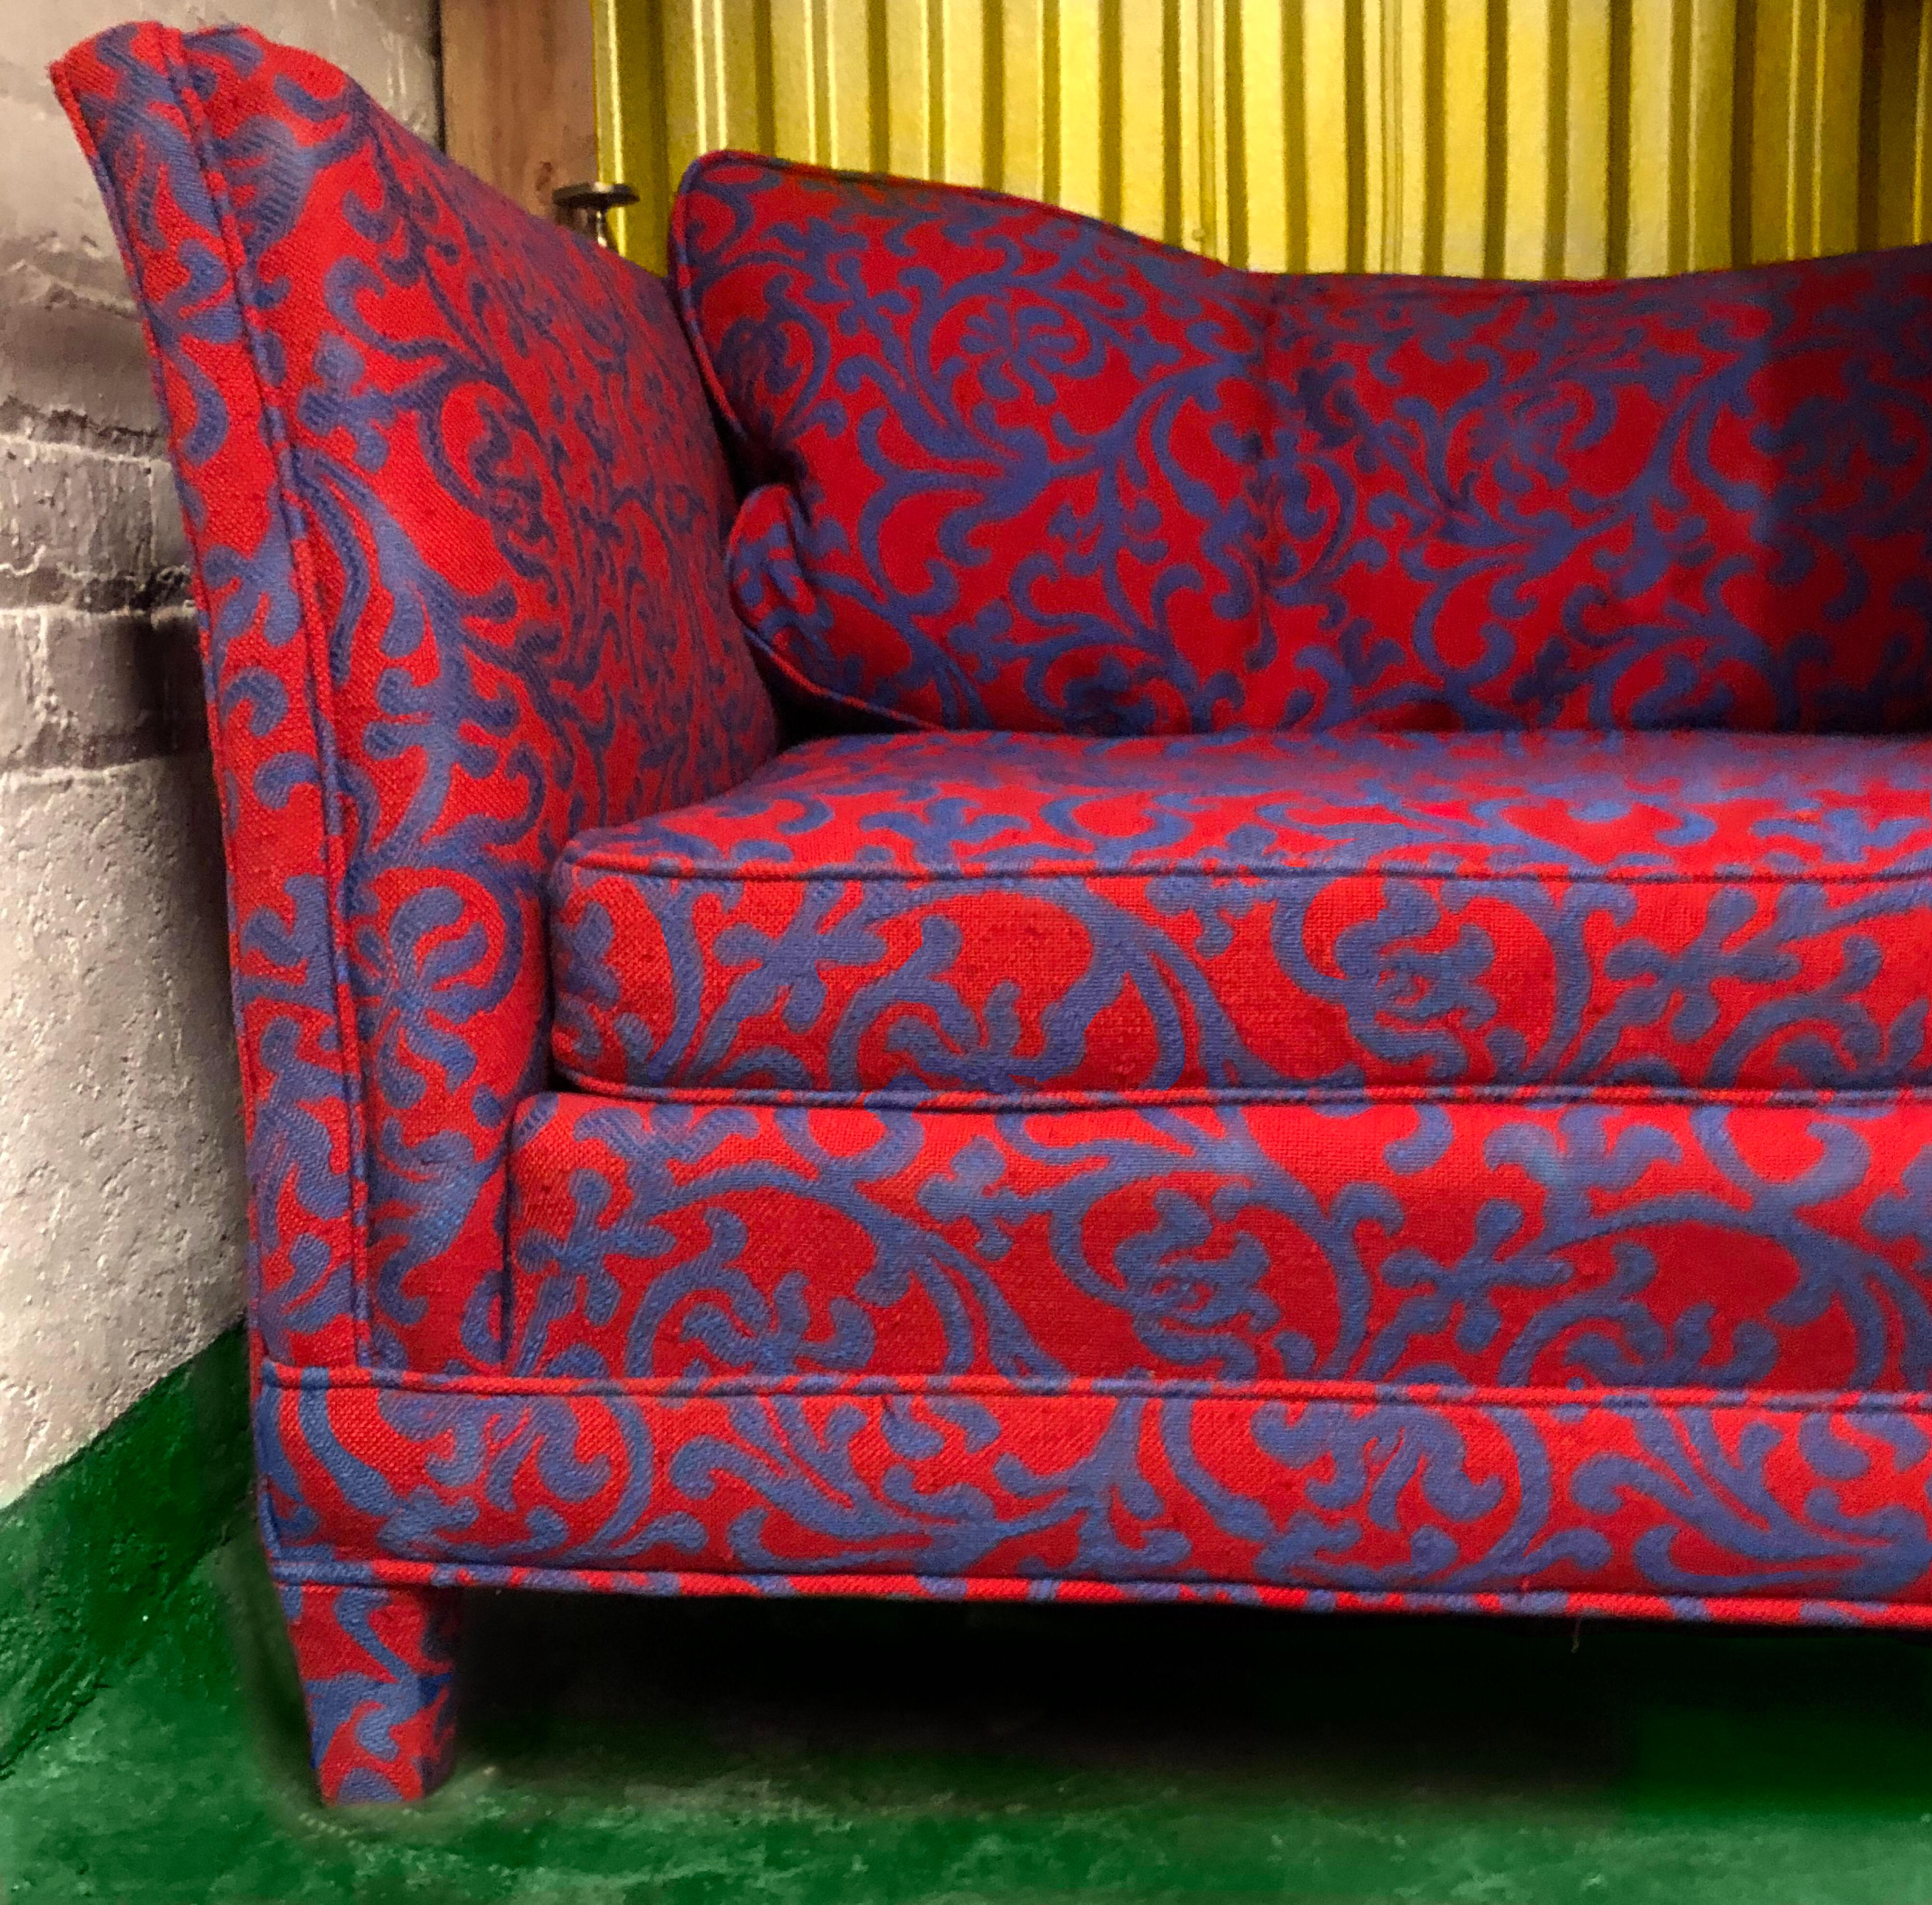 Custom, striking, unexpected juxtapositions of classics - color (red and blue), pattern (Jacobean and coral motifs) and form (table) vs texture (soft textile) Fresh and intelligent, this custom sofa and sofa table set at e treasures not to be